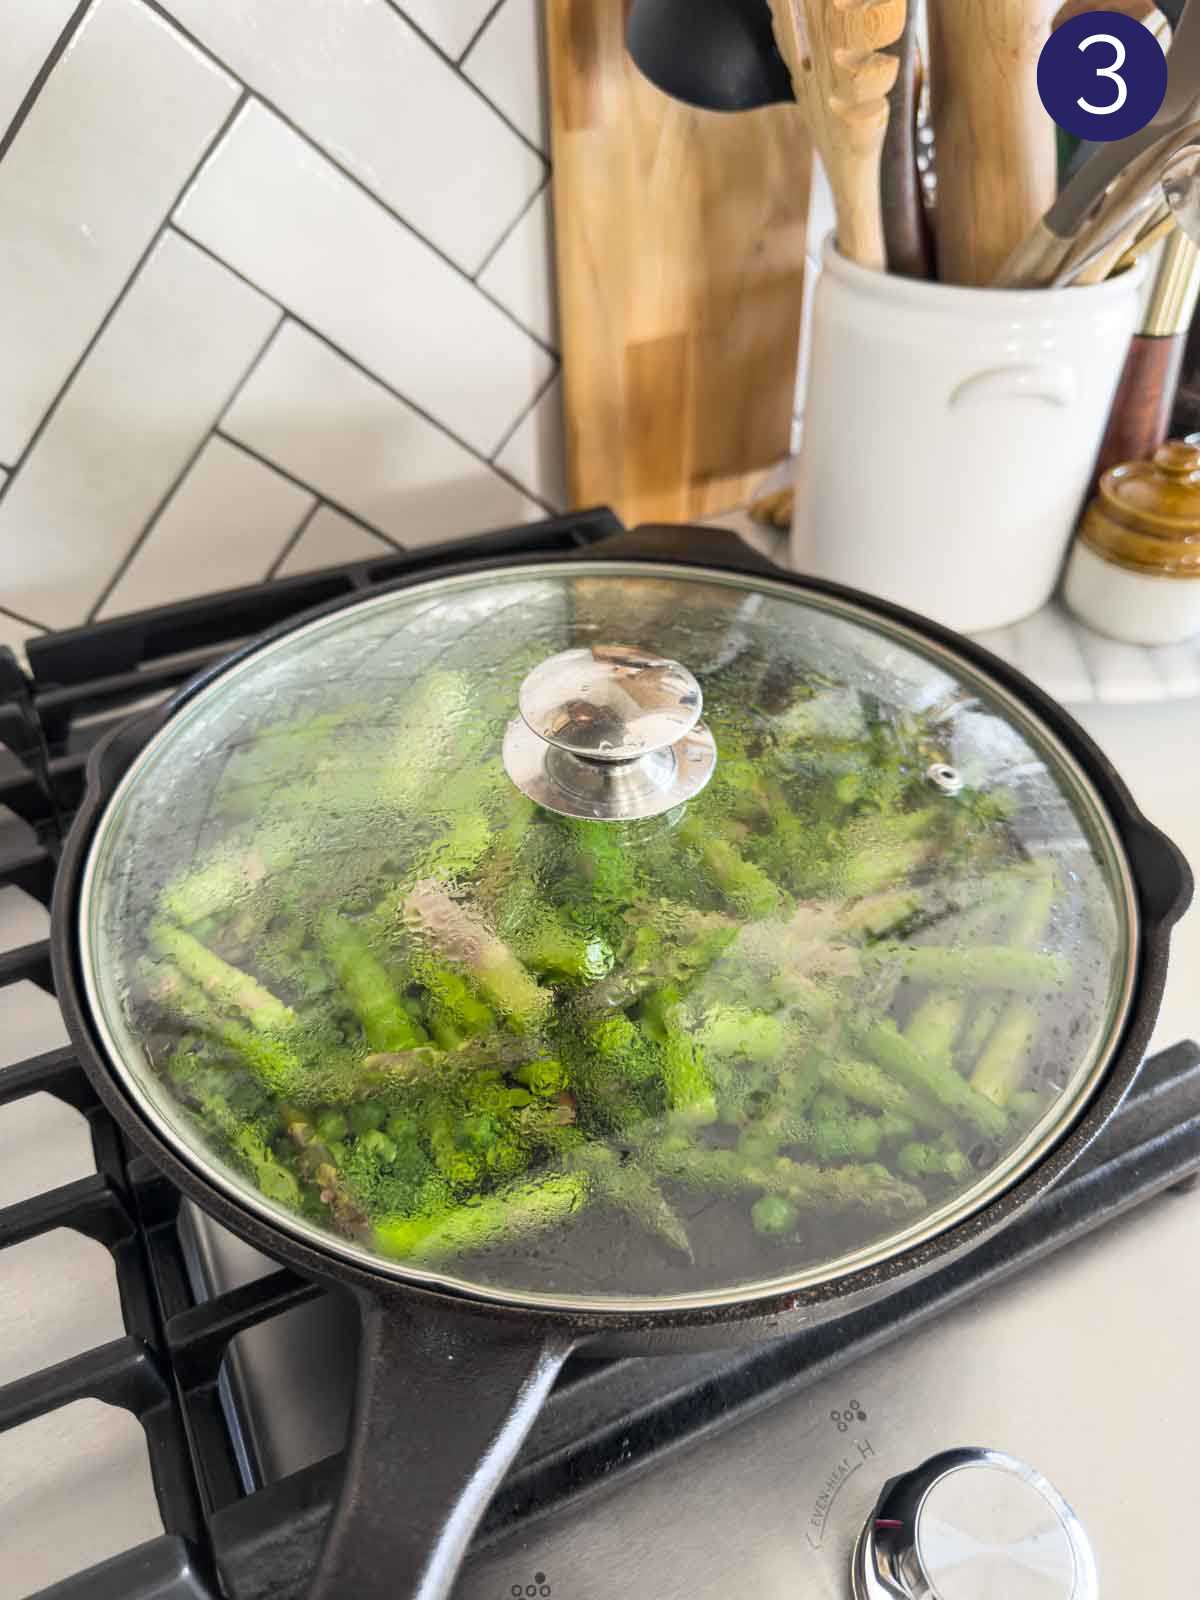 Cooking green peas and asparagus in a cast iron pan covered with a glass lid.